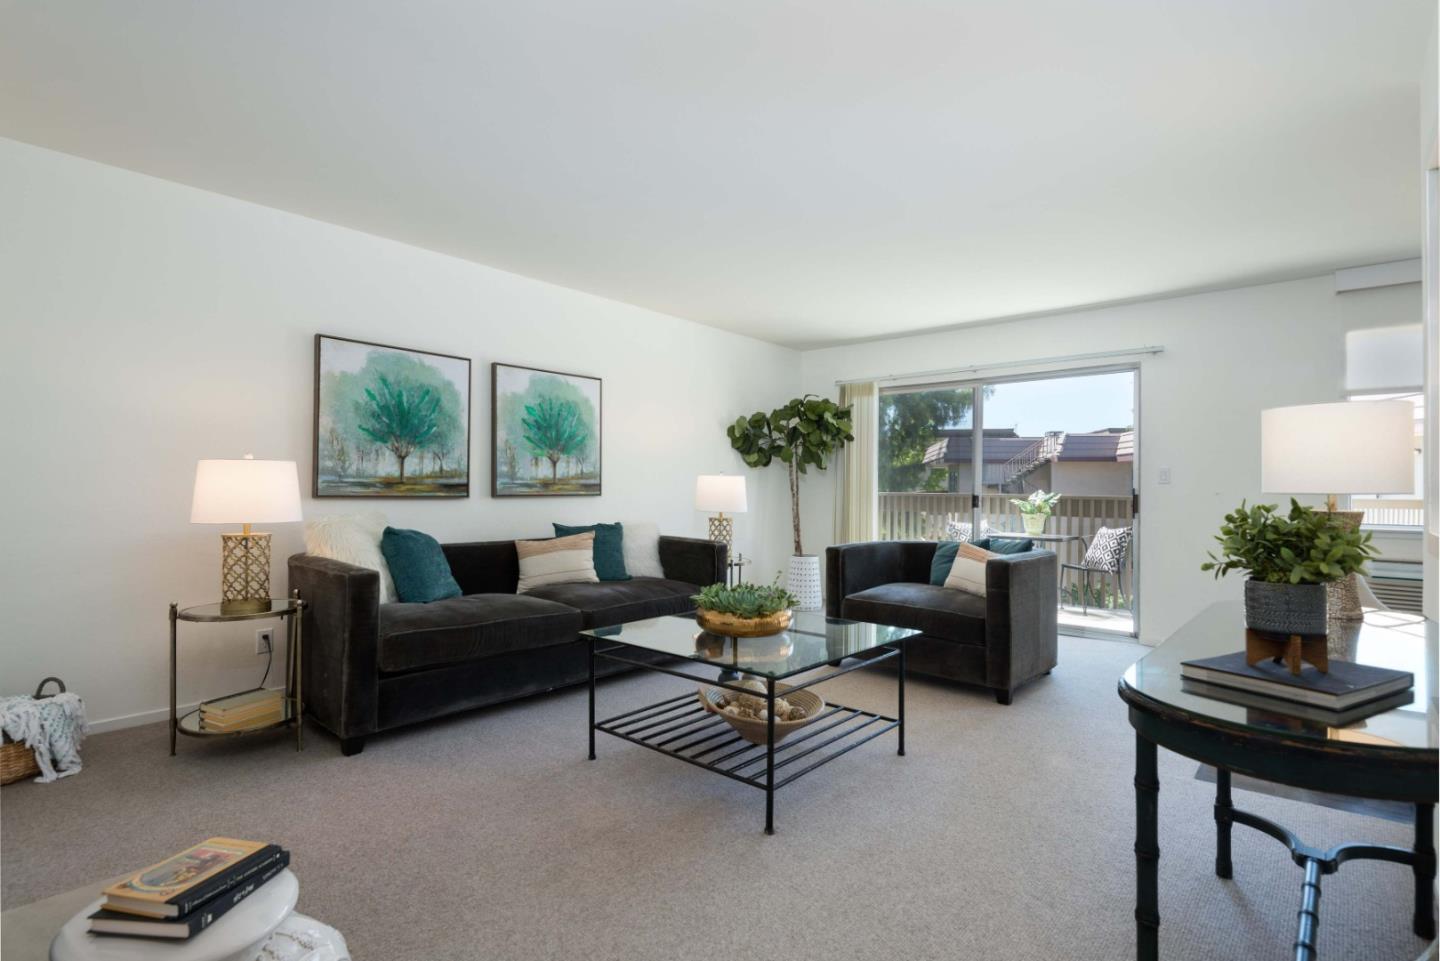 Located just two blocks from downtown Los Altos, this light & bright top-floor condominium has so much to offer, including a sunny deck overlooking the pool, wood-burning fireplace, & air conditioning. Wide windows and a large sliding glass door bring light into every room of this home. The kitchen has granite counters, ample cabinet space, and stainless appliances. The primary bedroom suite with a large walk-in closet and separate vanity.  This beautiful complex features a park-like setting, sparkling pool, and gated underground parking. An additional rented parking space is transferable to new the owner. Elevator access from the garage takes you securely to your floor. Laundry room is steps away with 2 washers and 2 dryers. Vibrant downtown with fabulous restaurants & retail just steps away. Easy access to commute routes, tech companies, & 5 miles to Stanford. Excellent Los Altos schools.